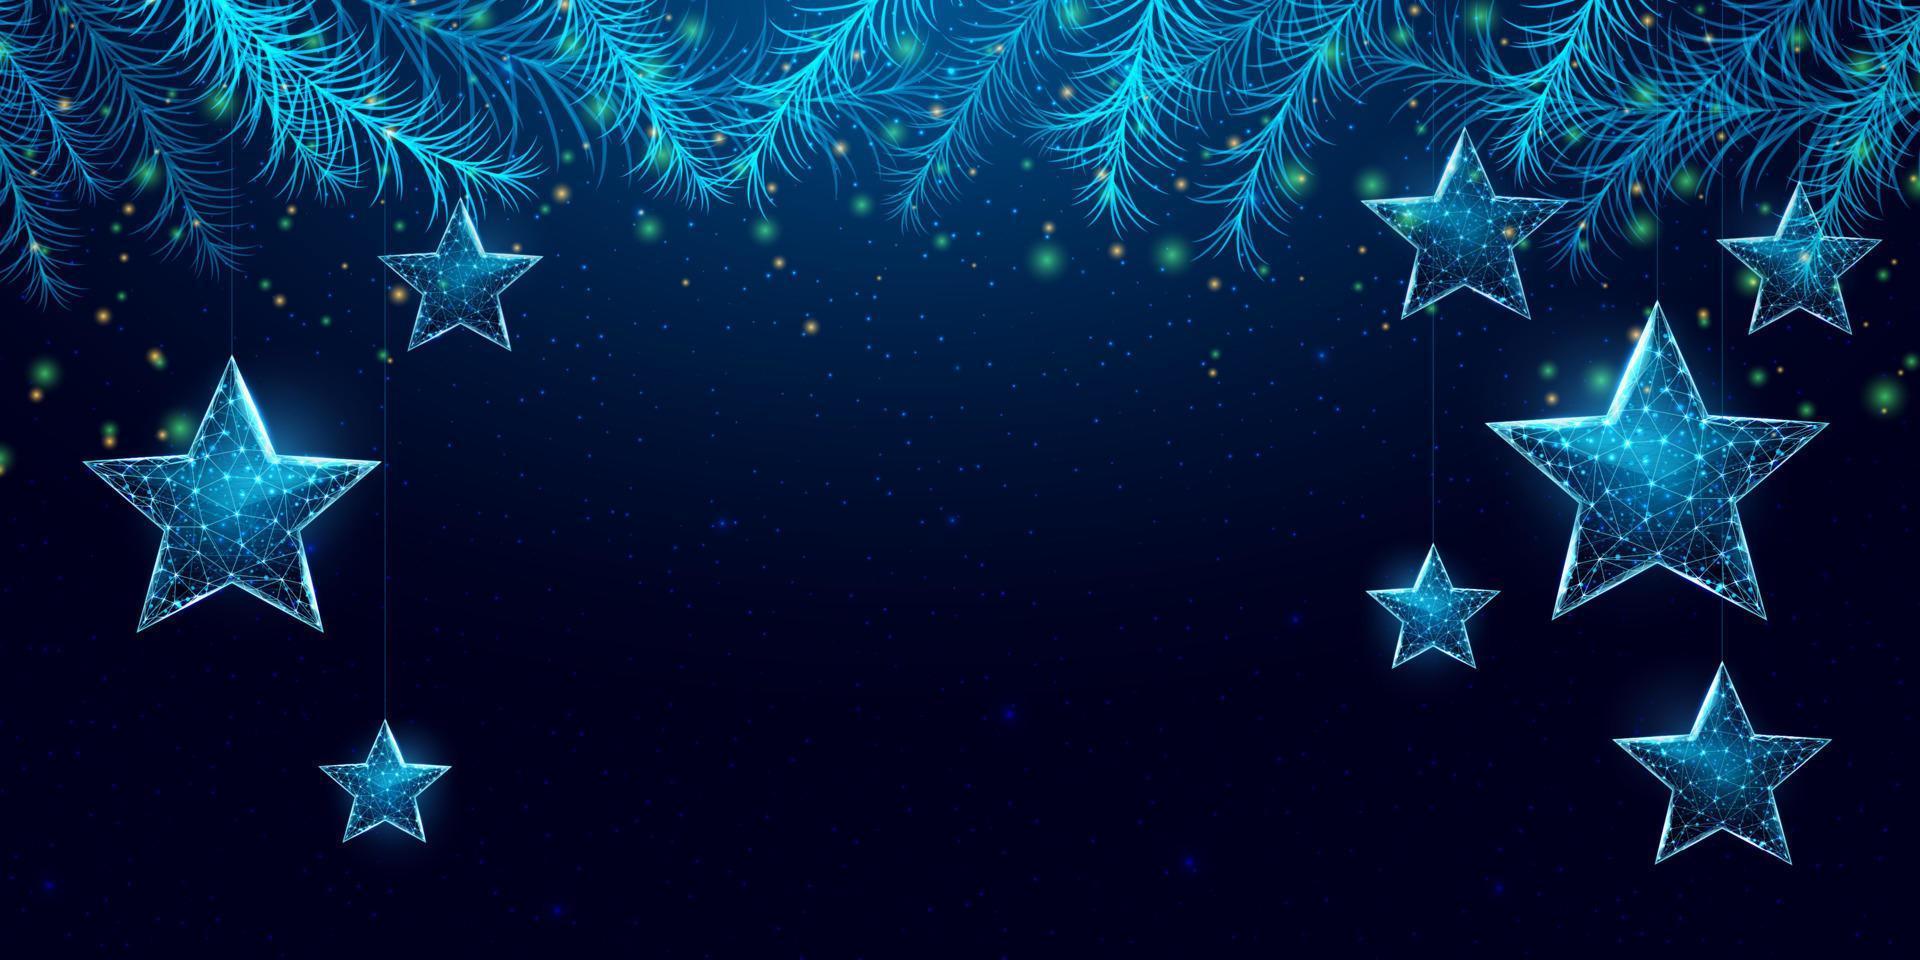 Wireframe Christmas stars and Christmas tree branches, low poly style. New Year banner. Abstract modern 3d vector illustration on blue background.